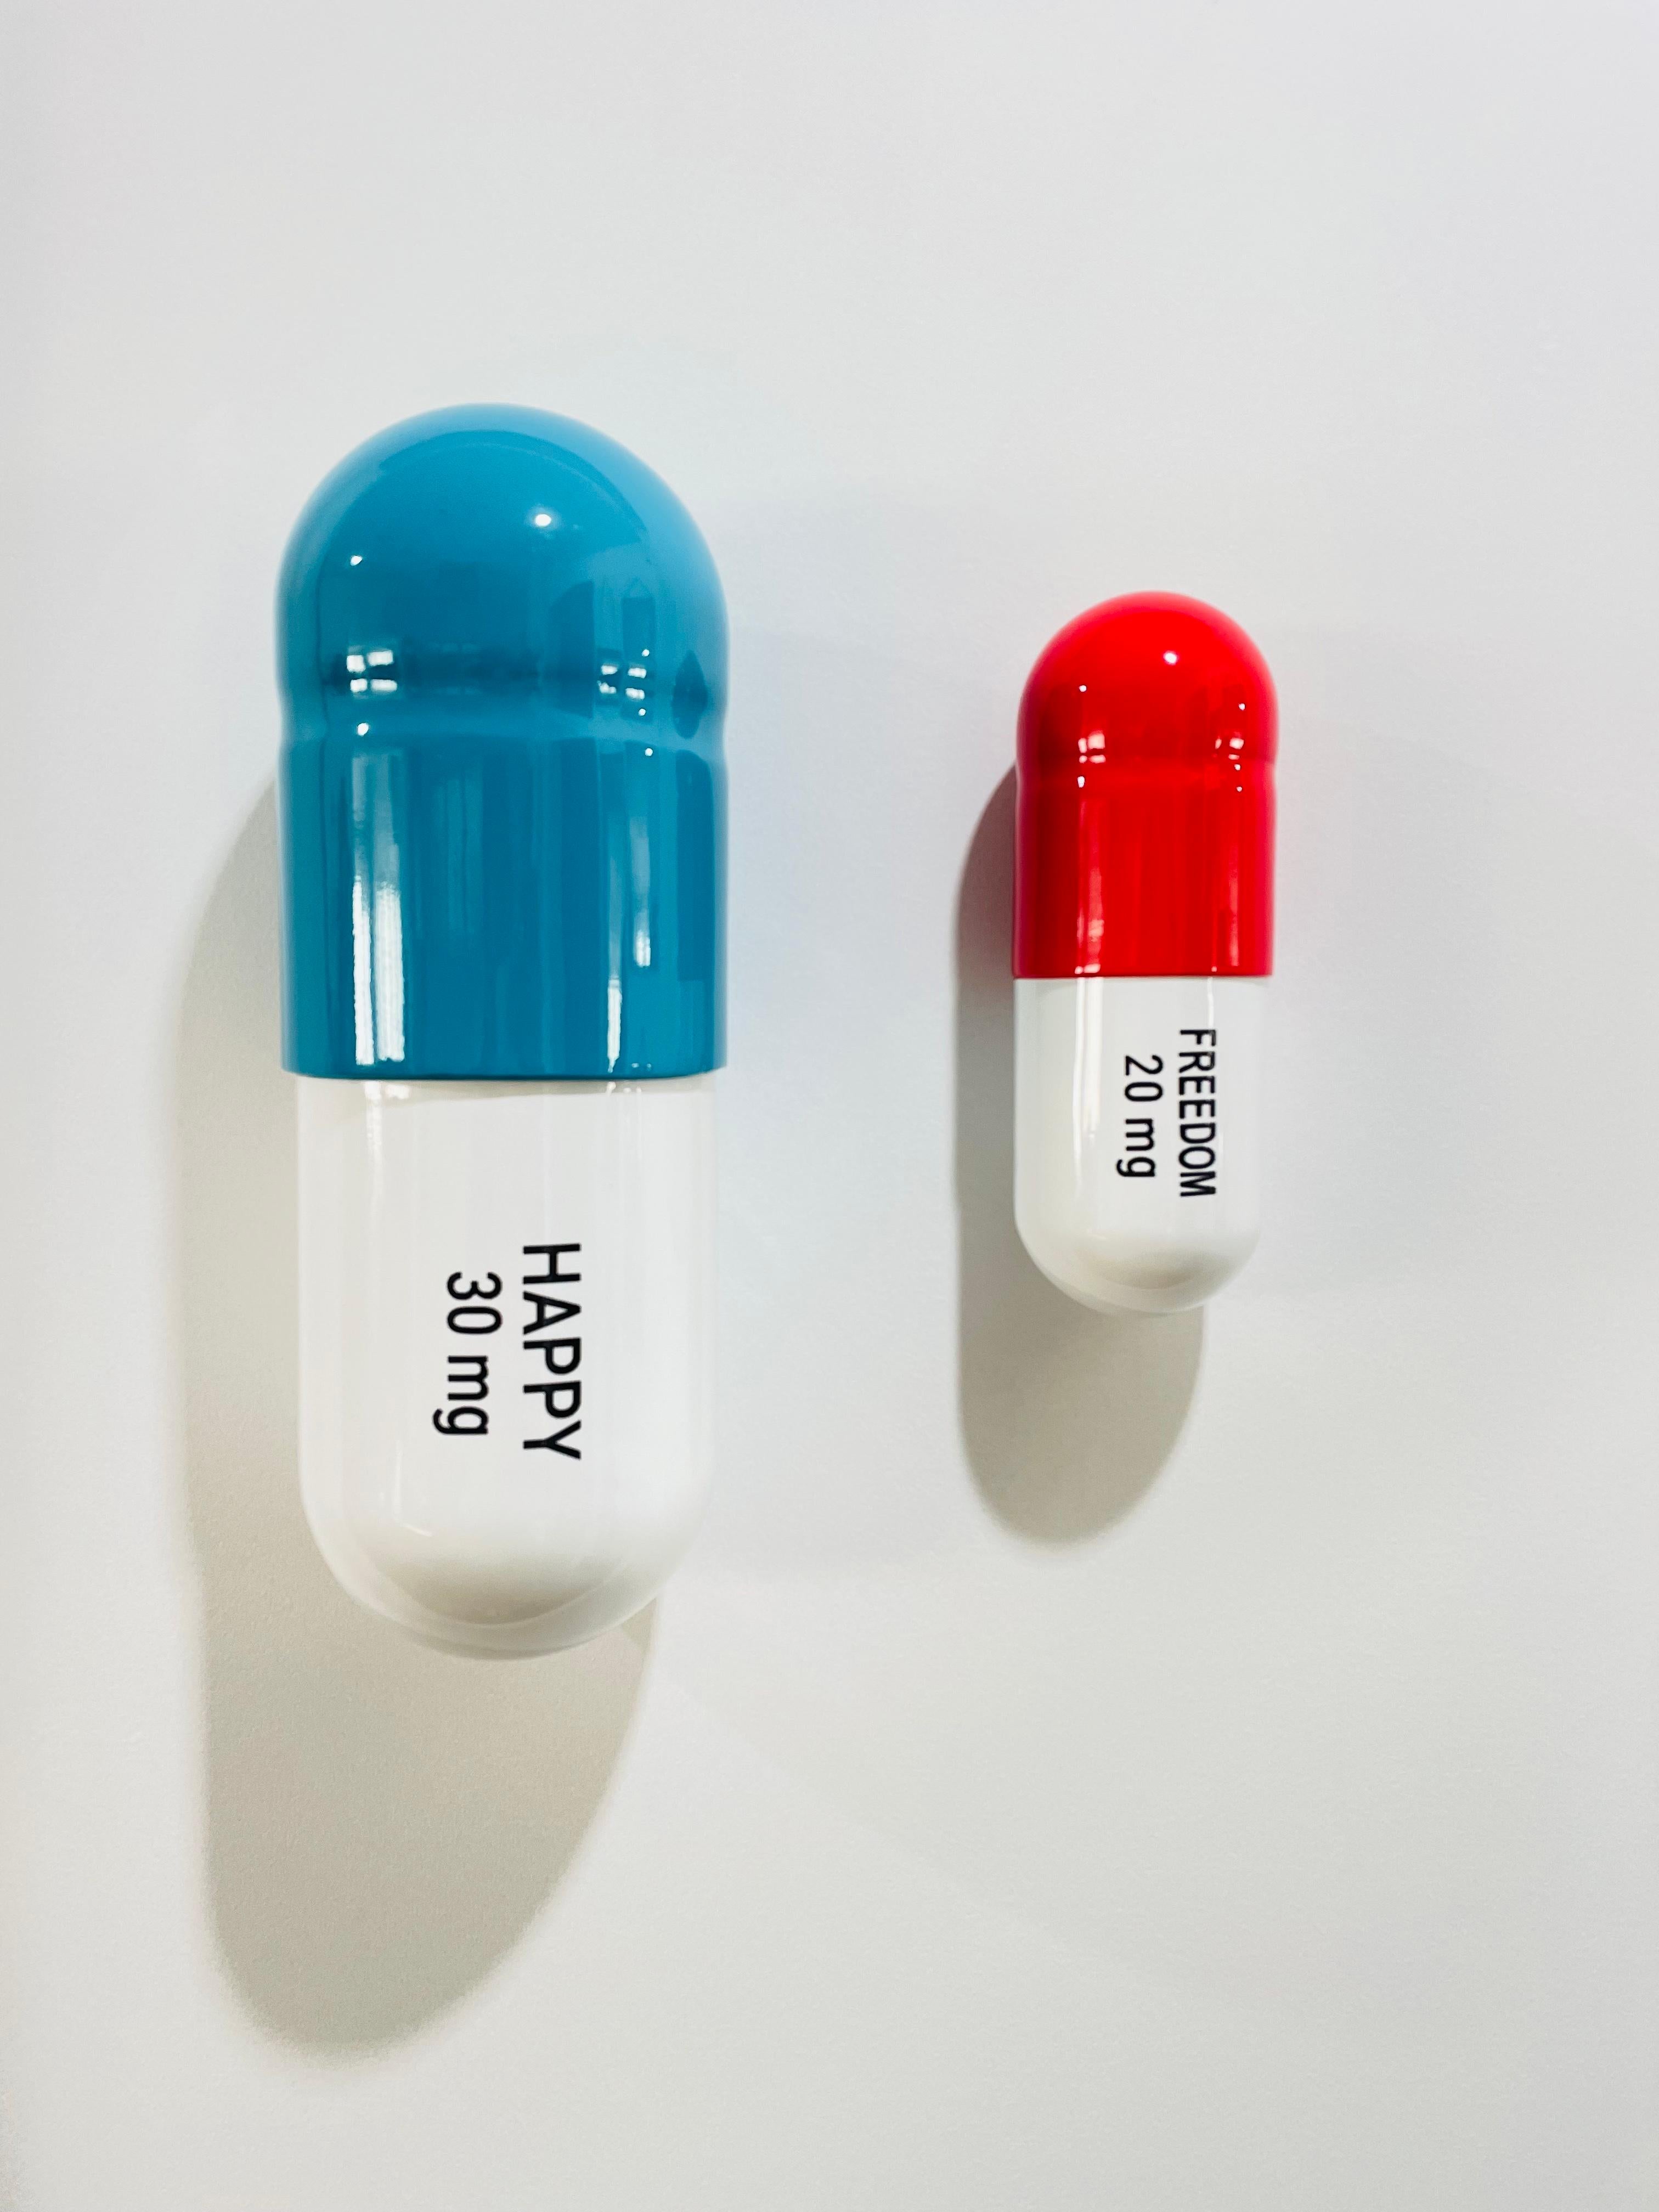 Tal Nehoray Figurative Sculpture - 30 MG Happy 20 MG freedom pill Combo (red, turquoise) - figurative sculpture